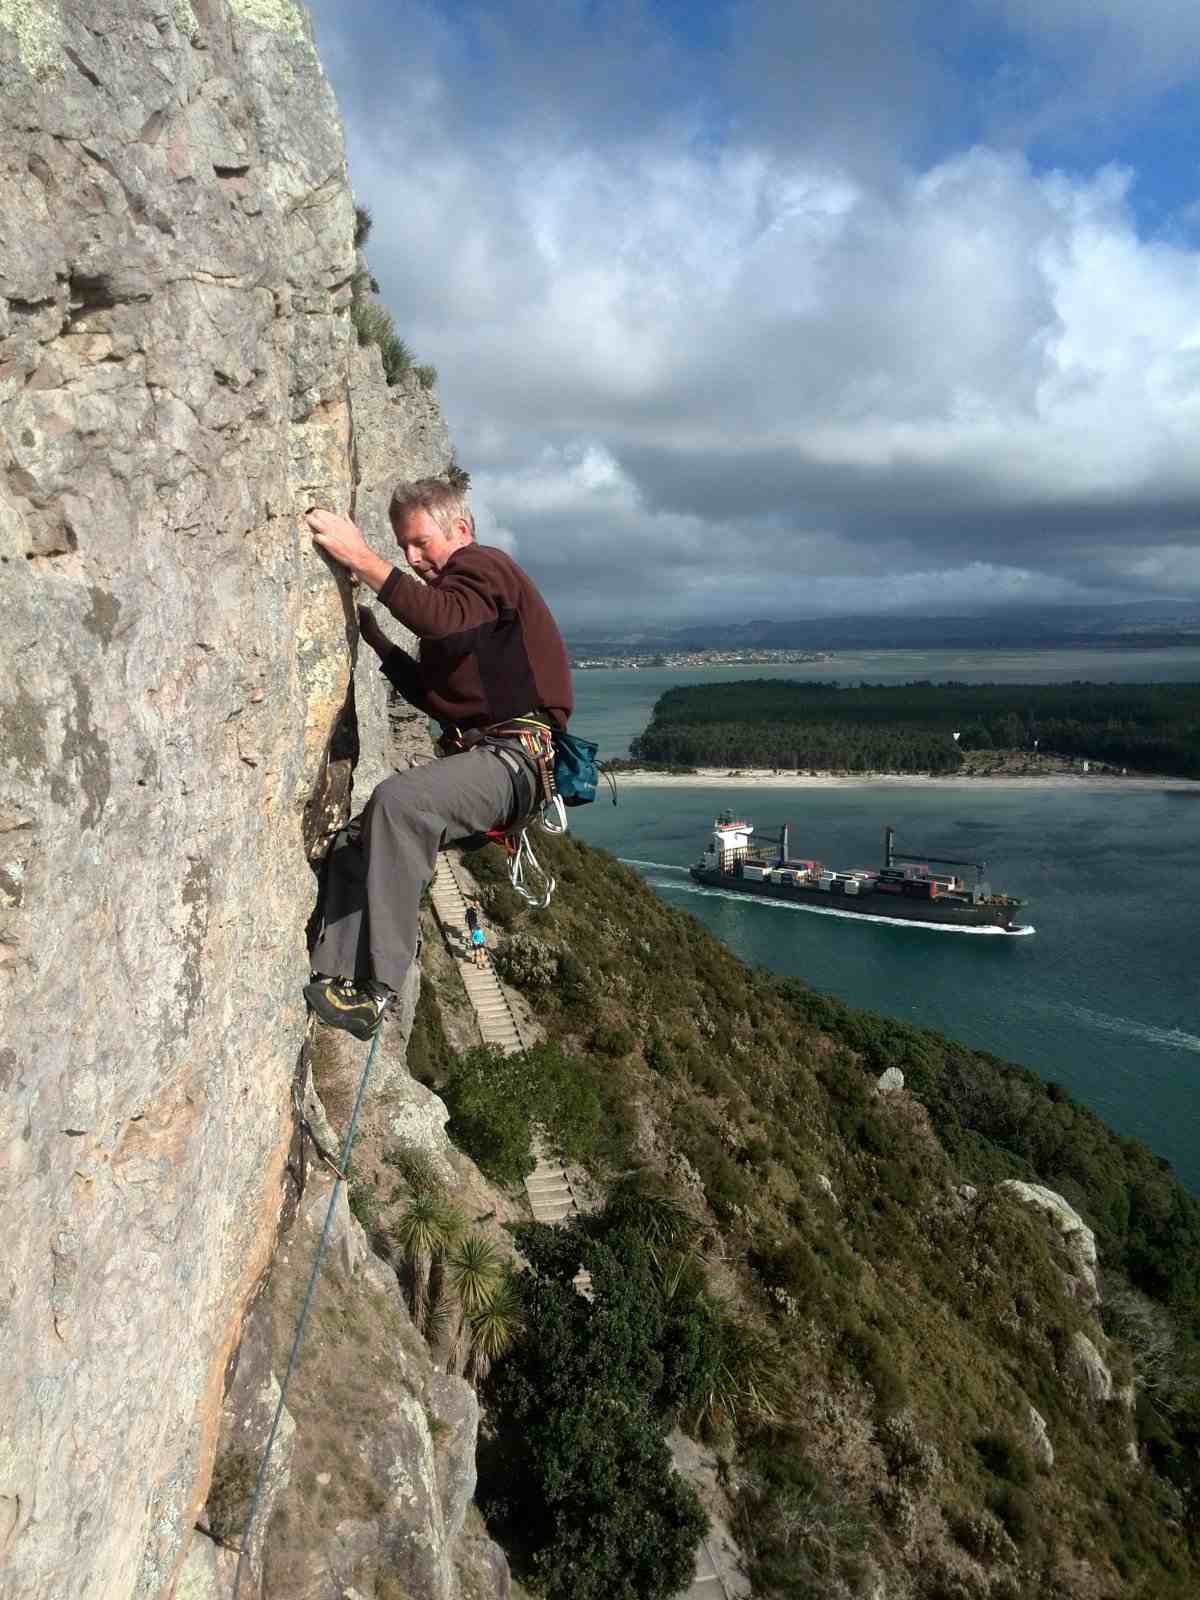 Climber without helmet on slightly overhanging rock face above a harbour with container ship.